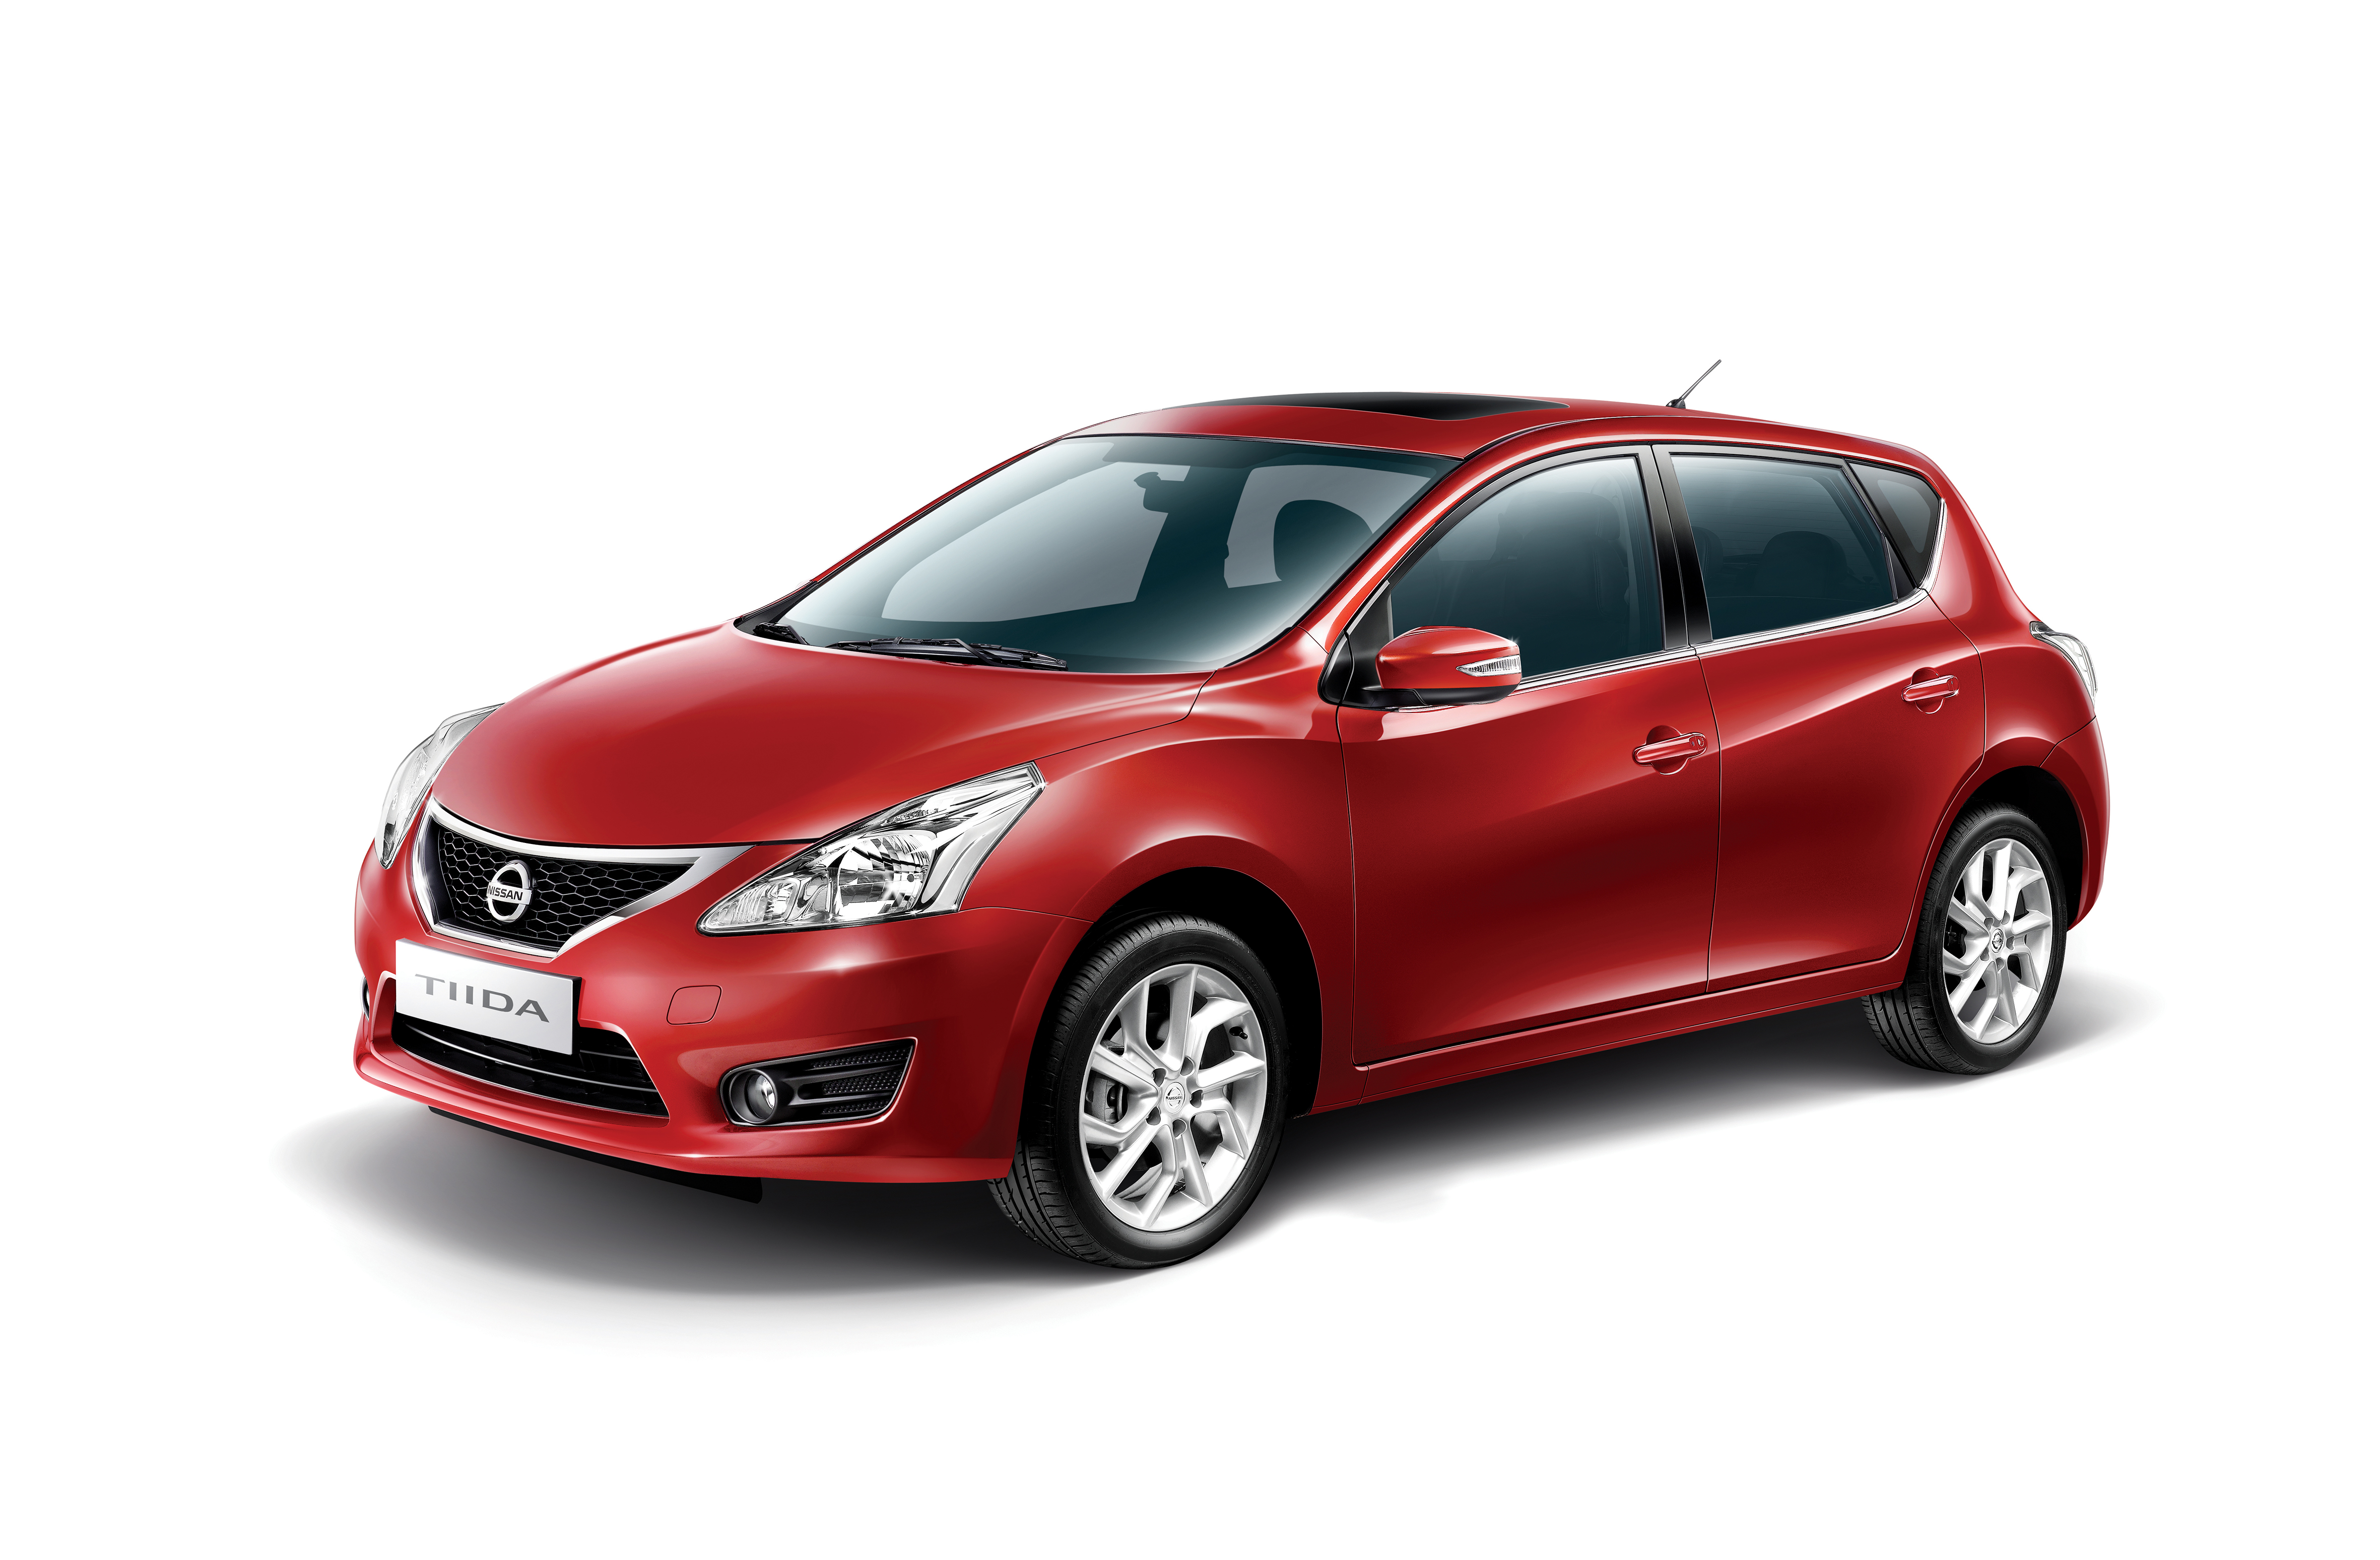 Nissan Tiida: Region's best-selling compact hatchback continues to amaze